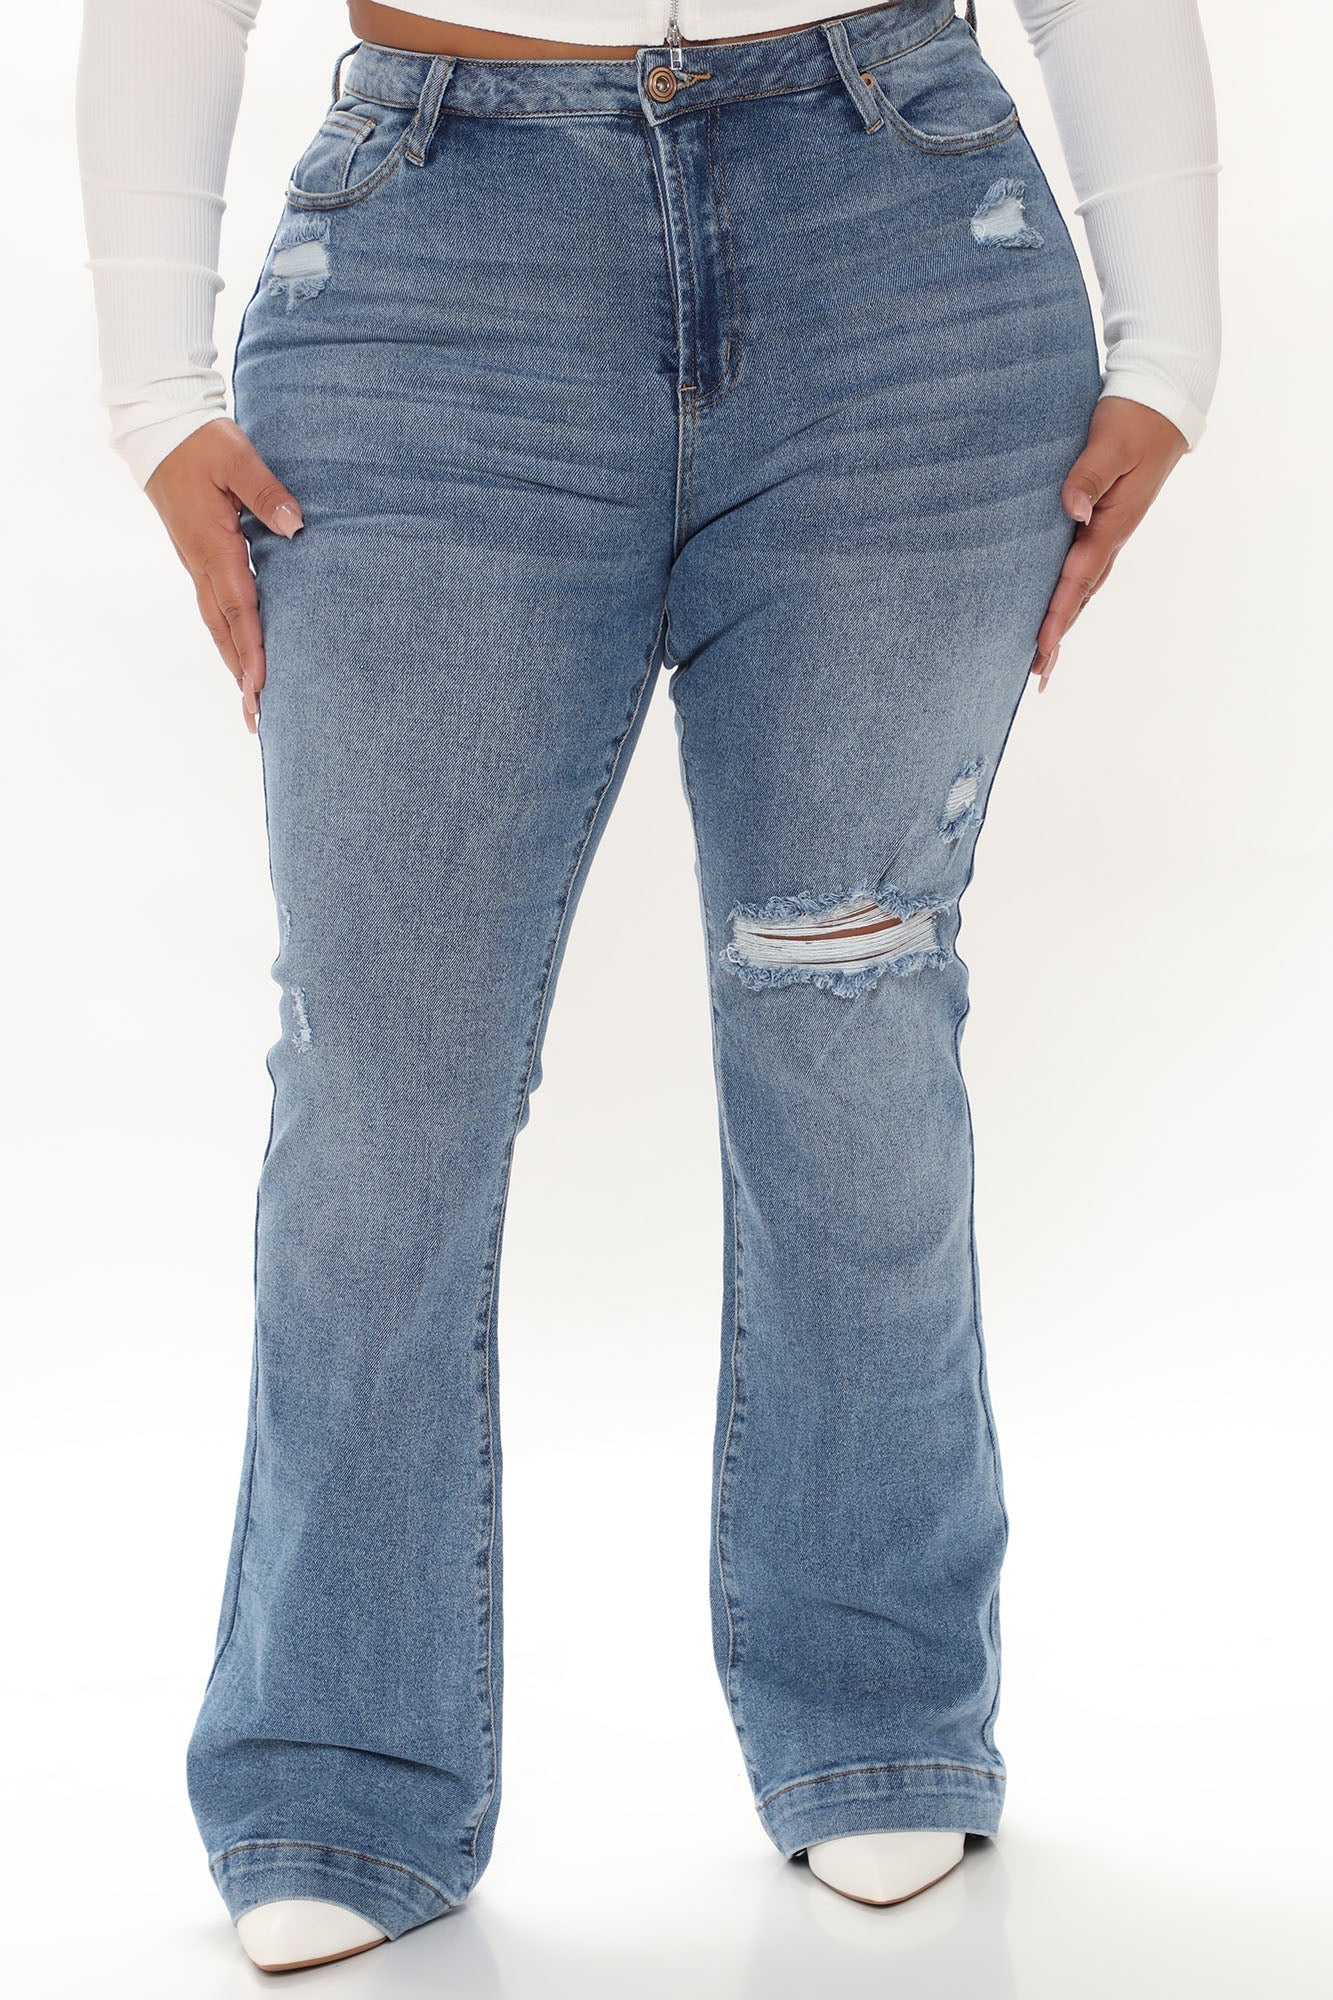 Only One For Me Distressed Bootcut Jeans - Medium Blue Wash